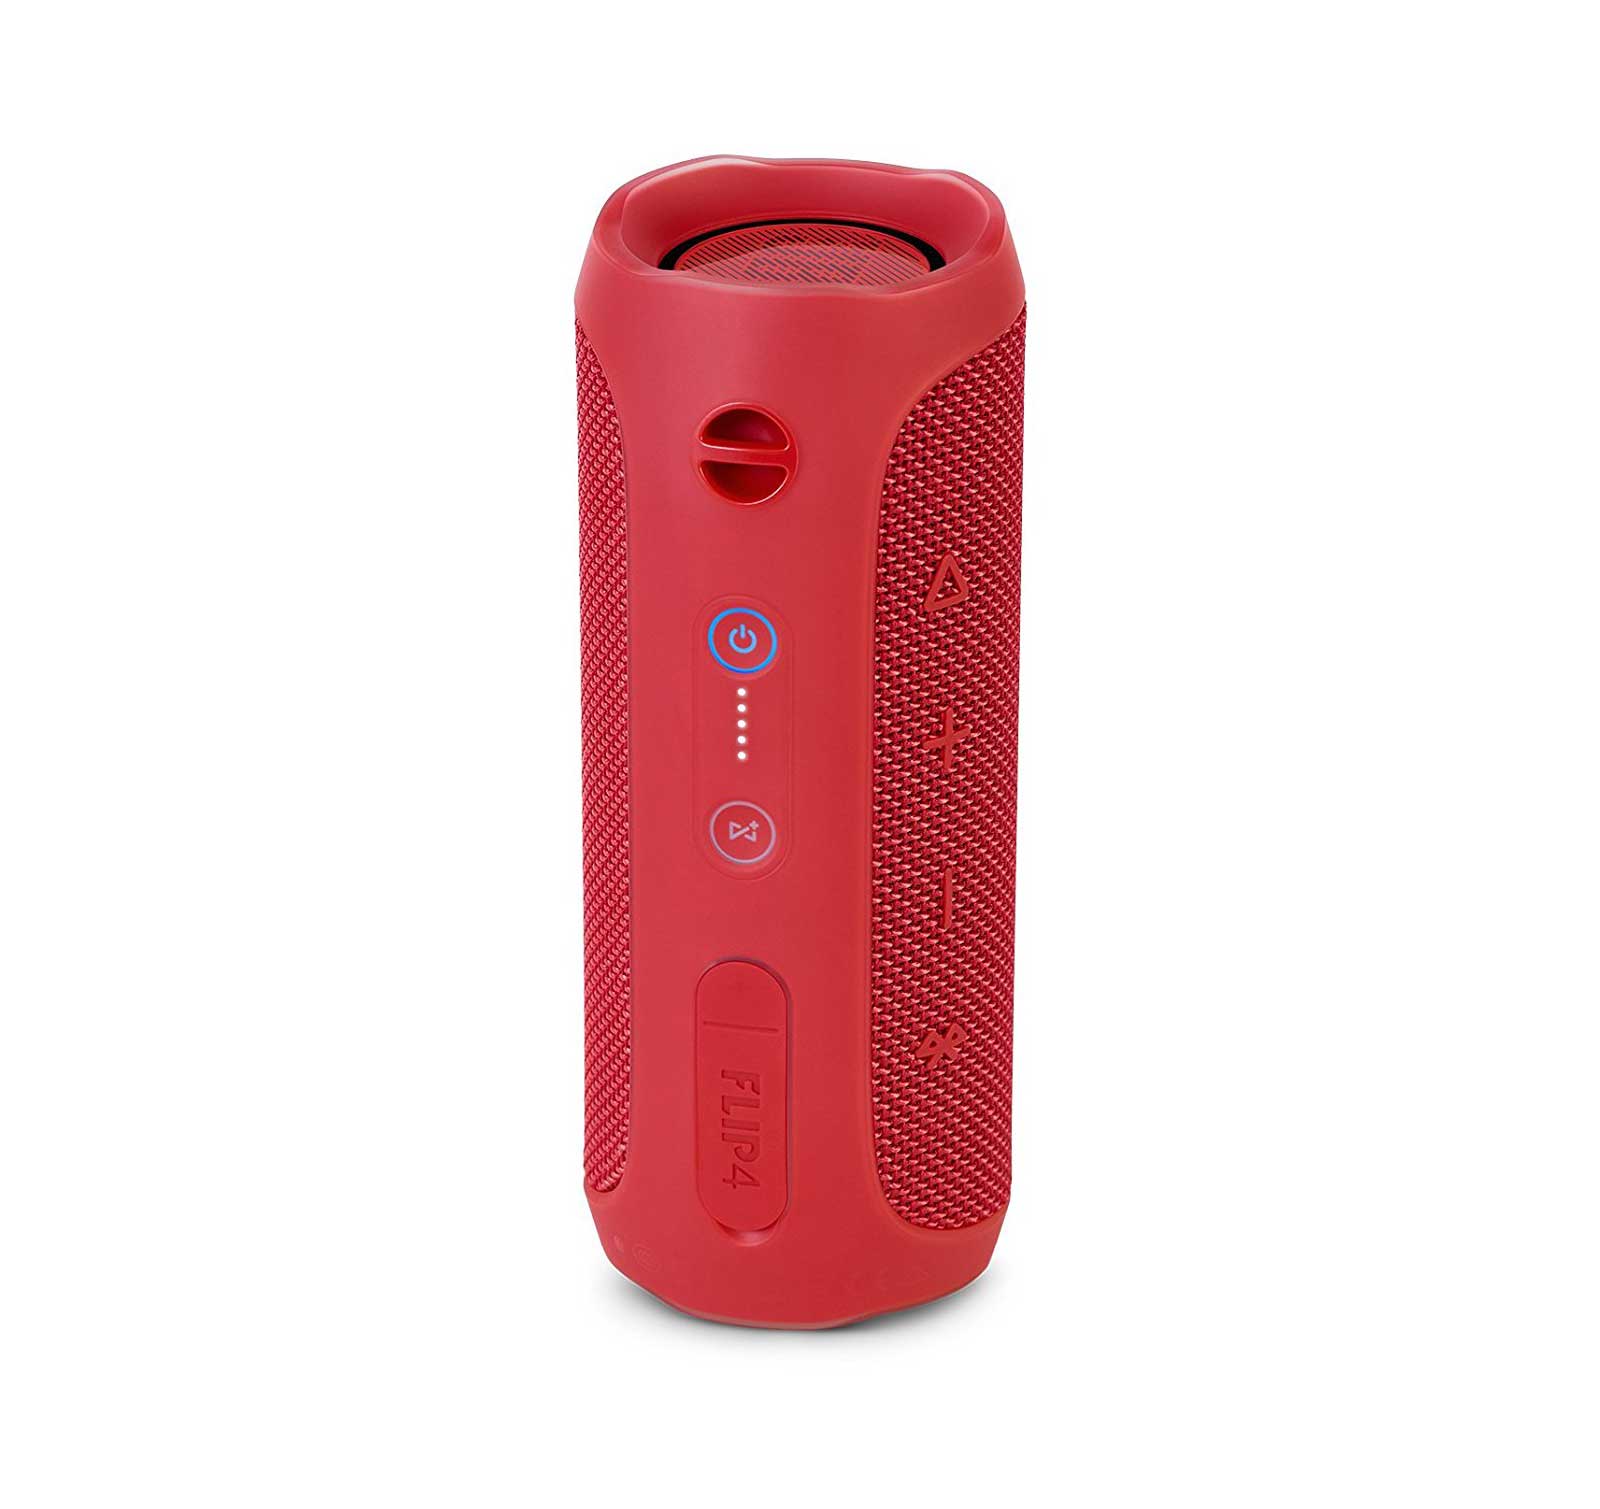 Waterproof Portable Bluetooth Speaker with 12 hours of playtime and powerful sound - image 3 of 3